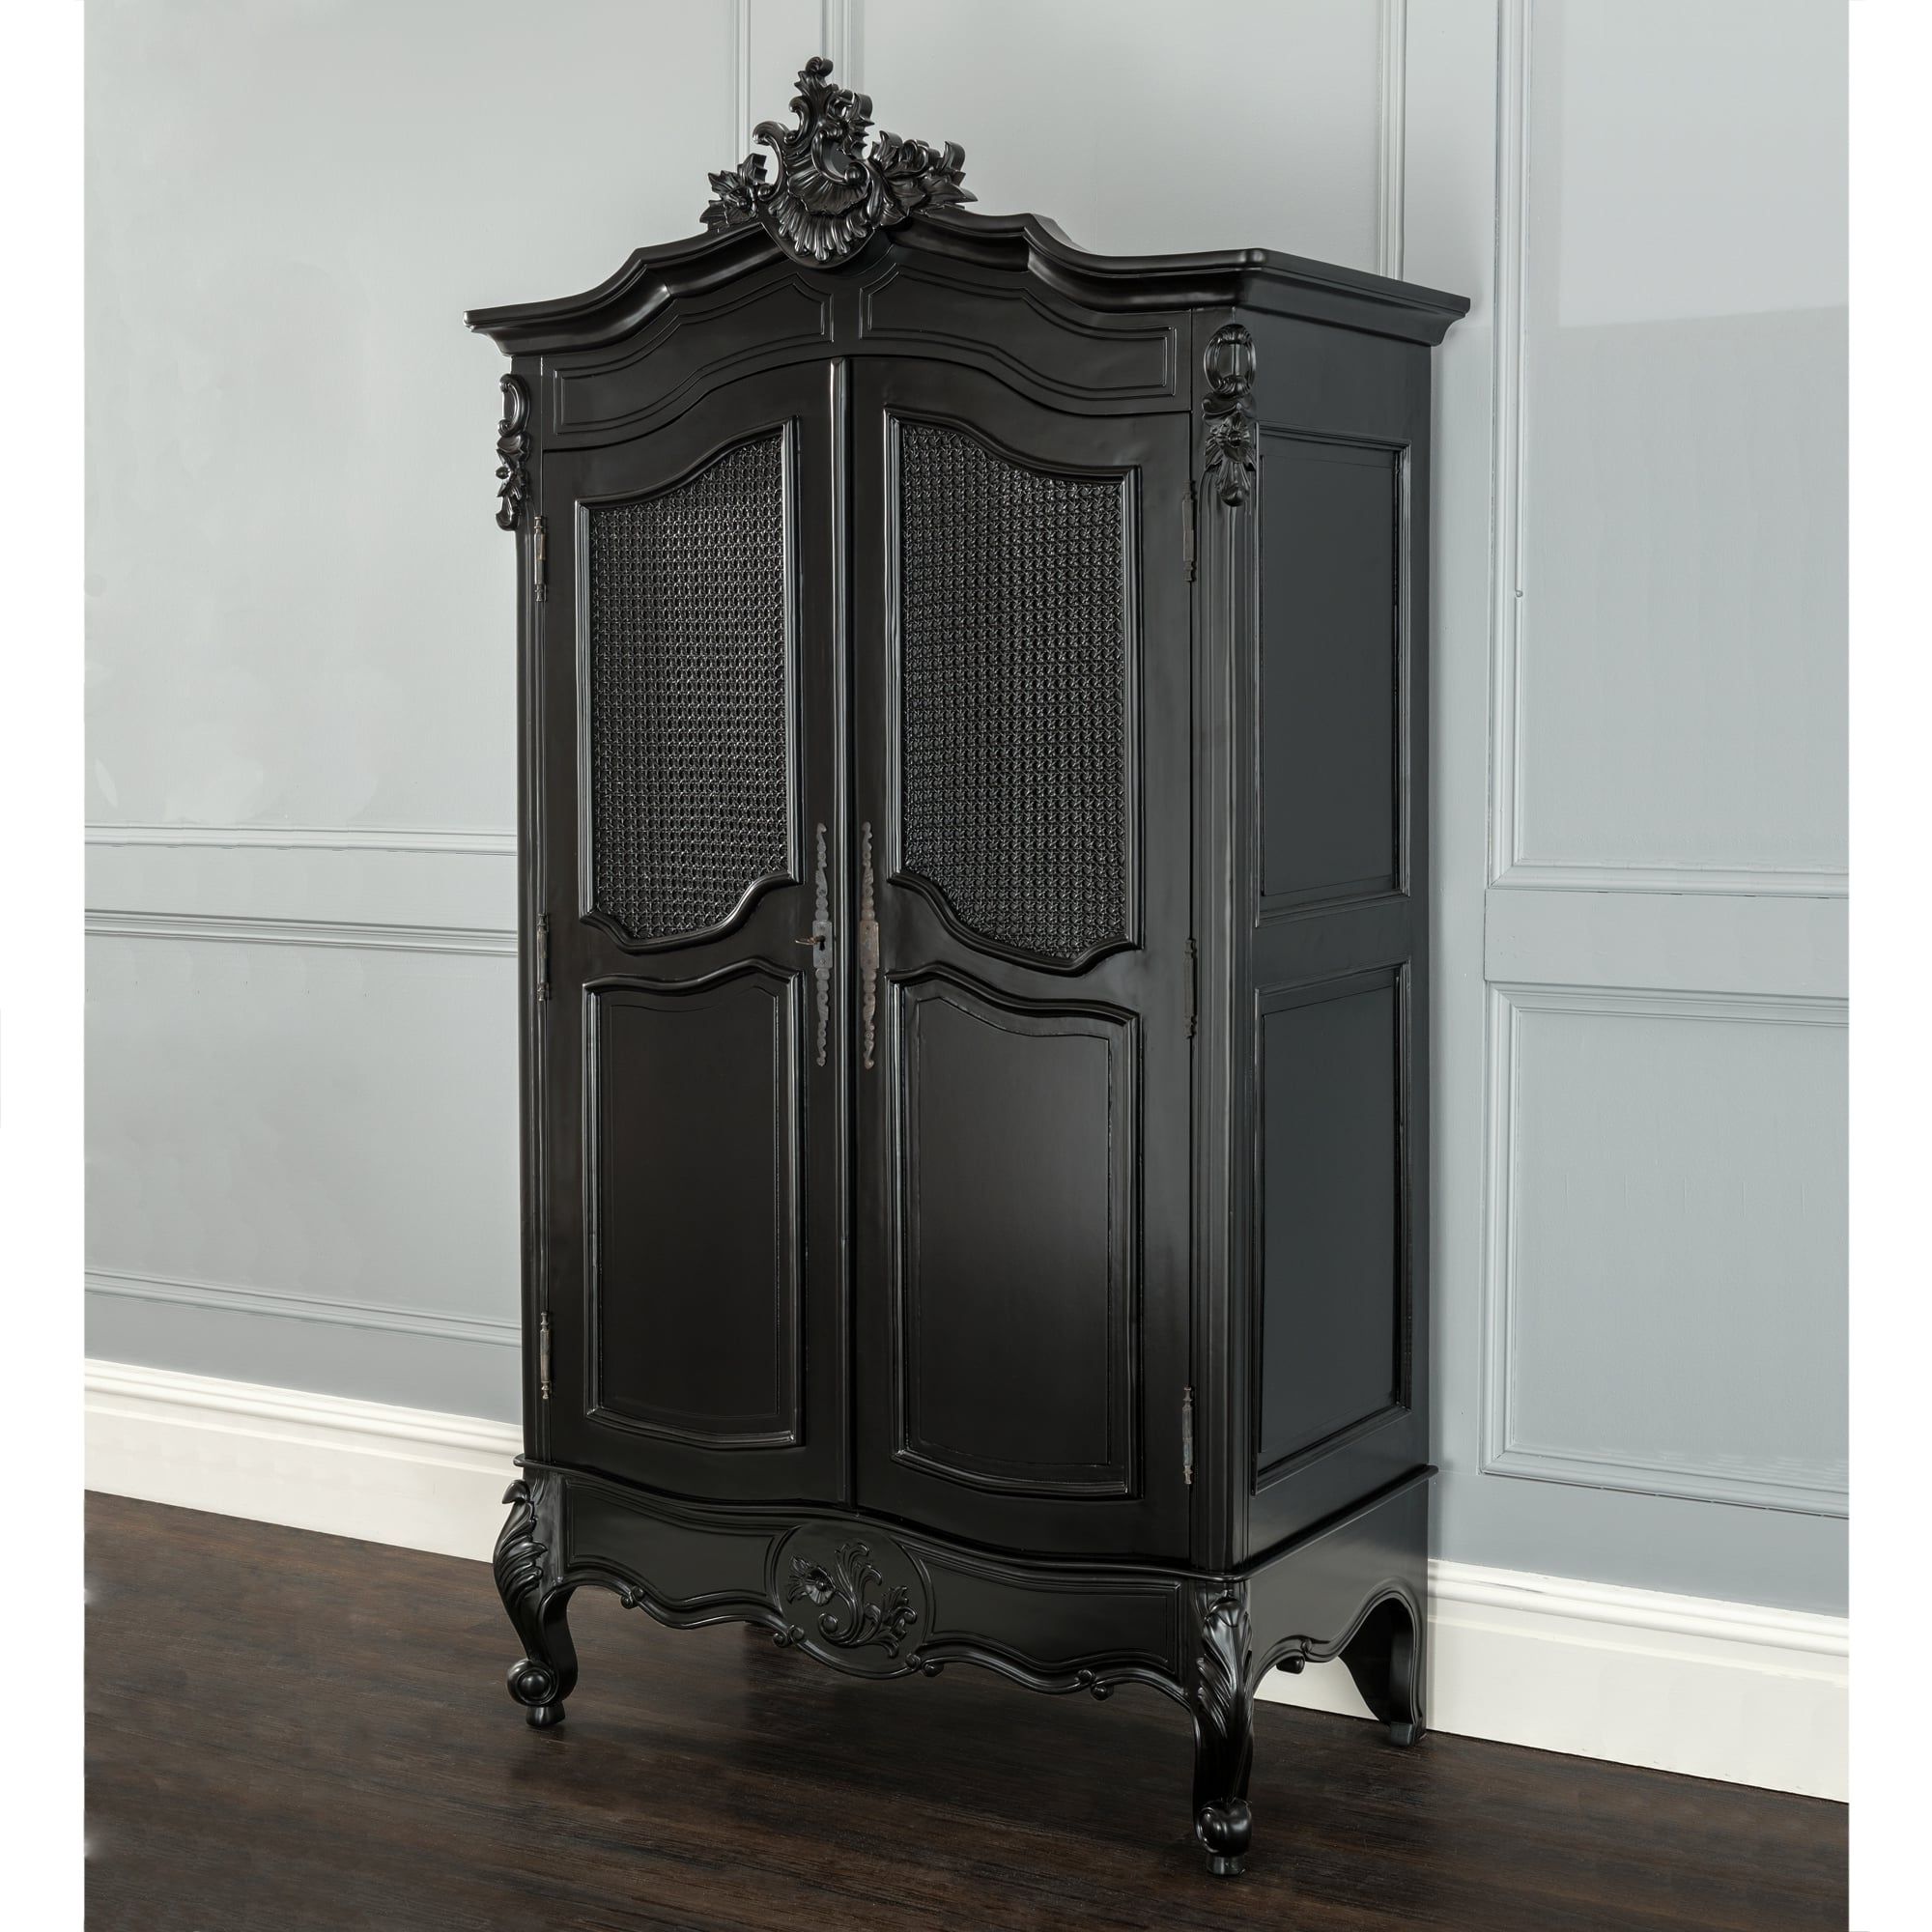 La Rochelle Antique French Wardrobe | Black Painted Furniture Within Black French Style Wardrobes (View 5 of 20)